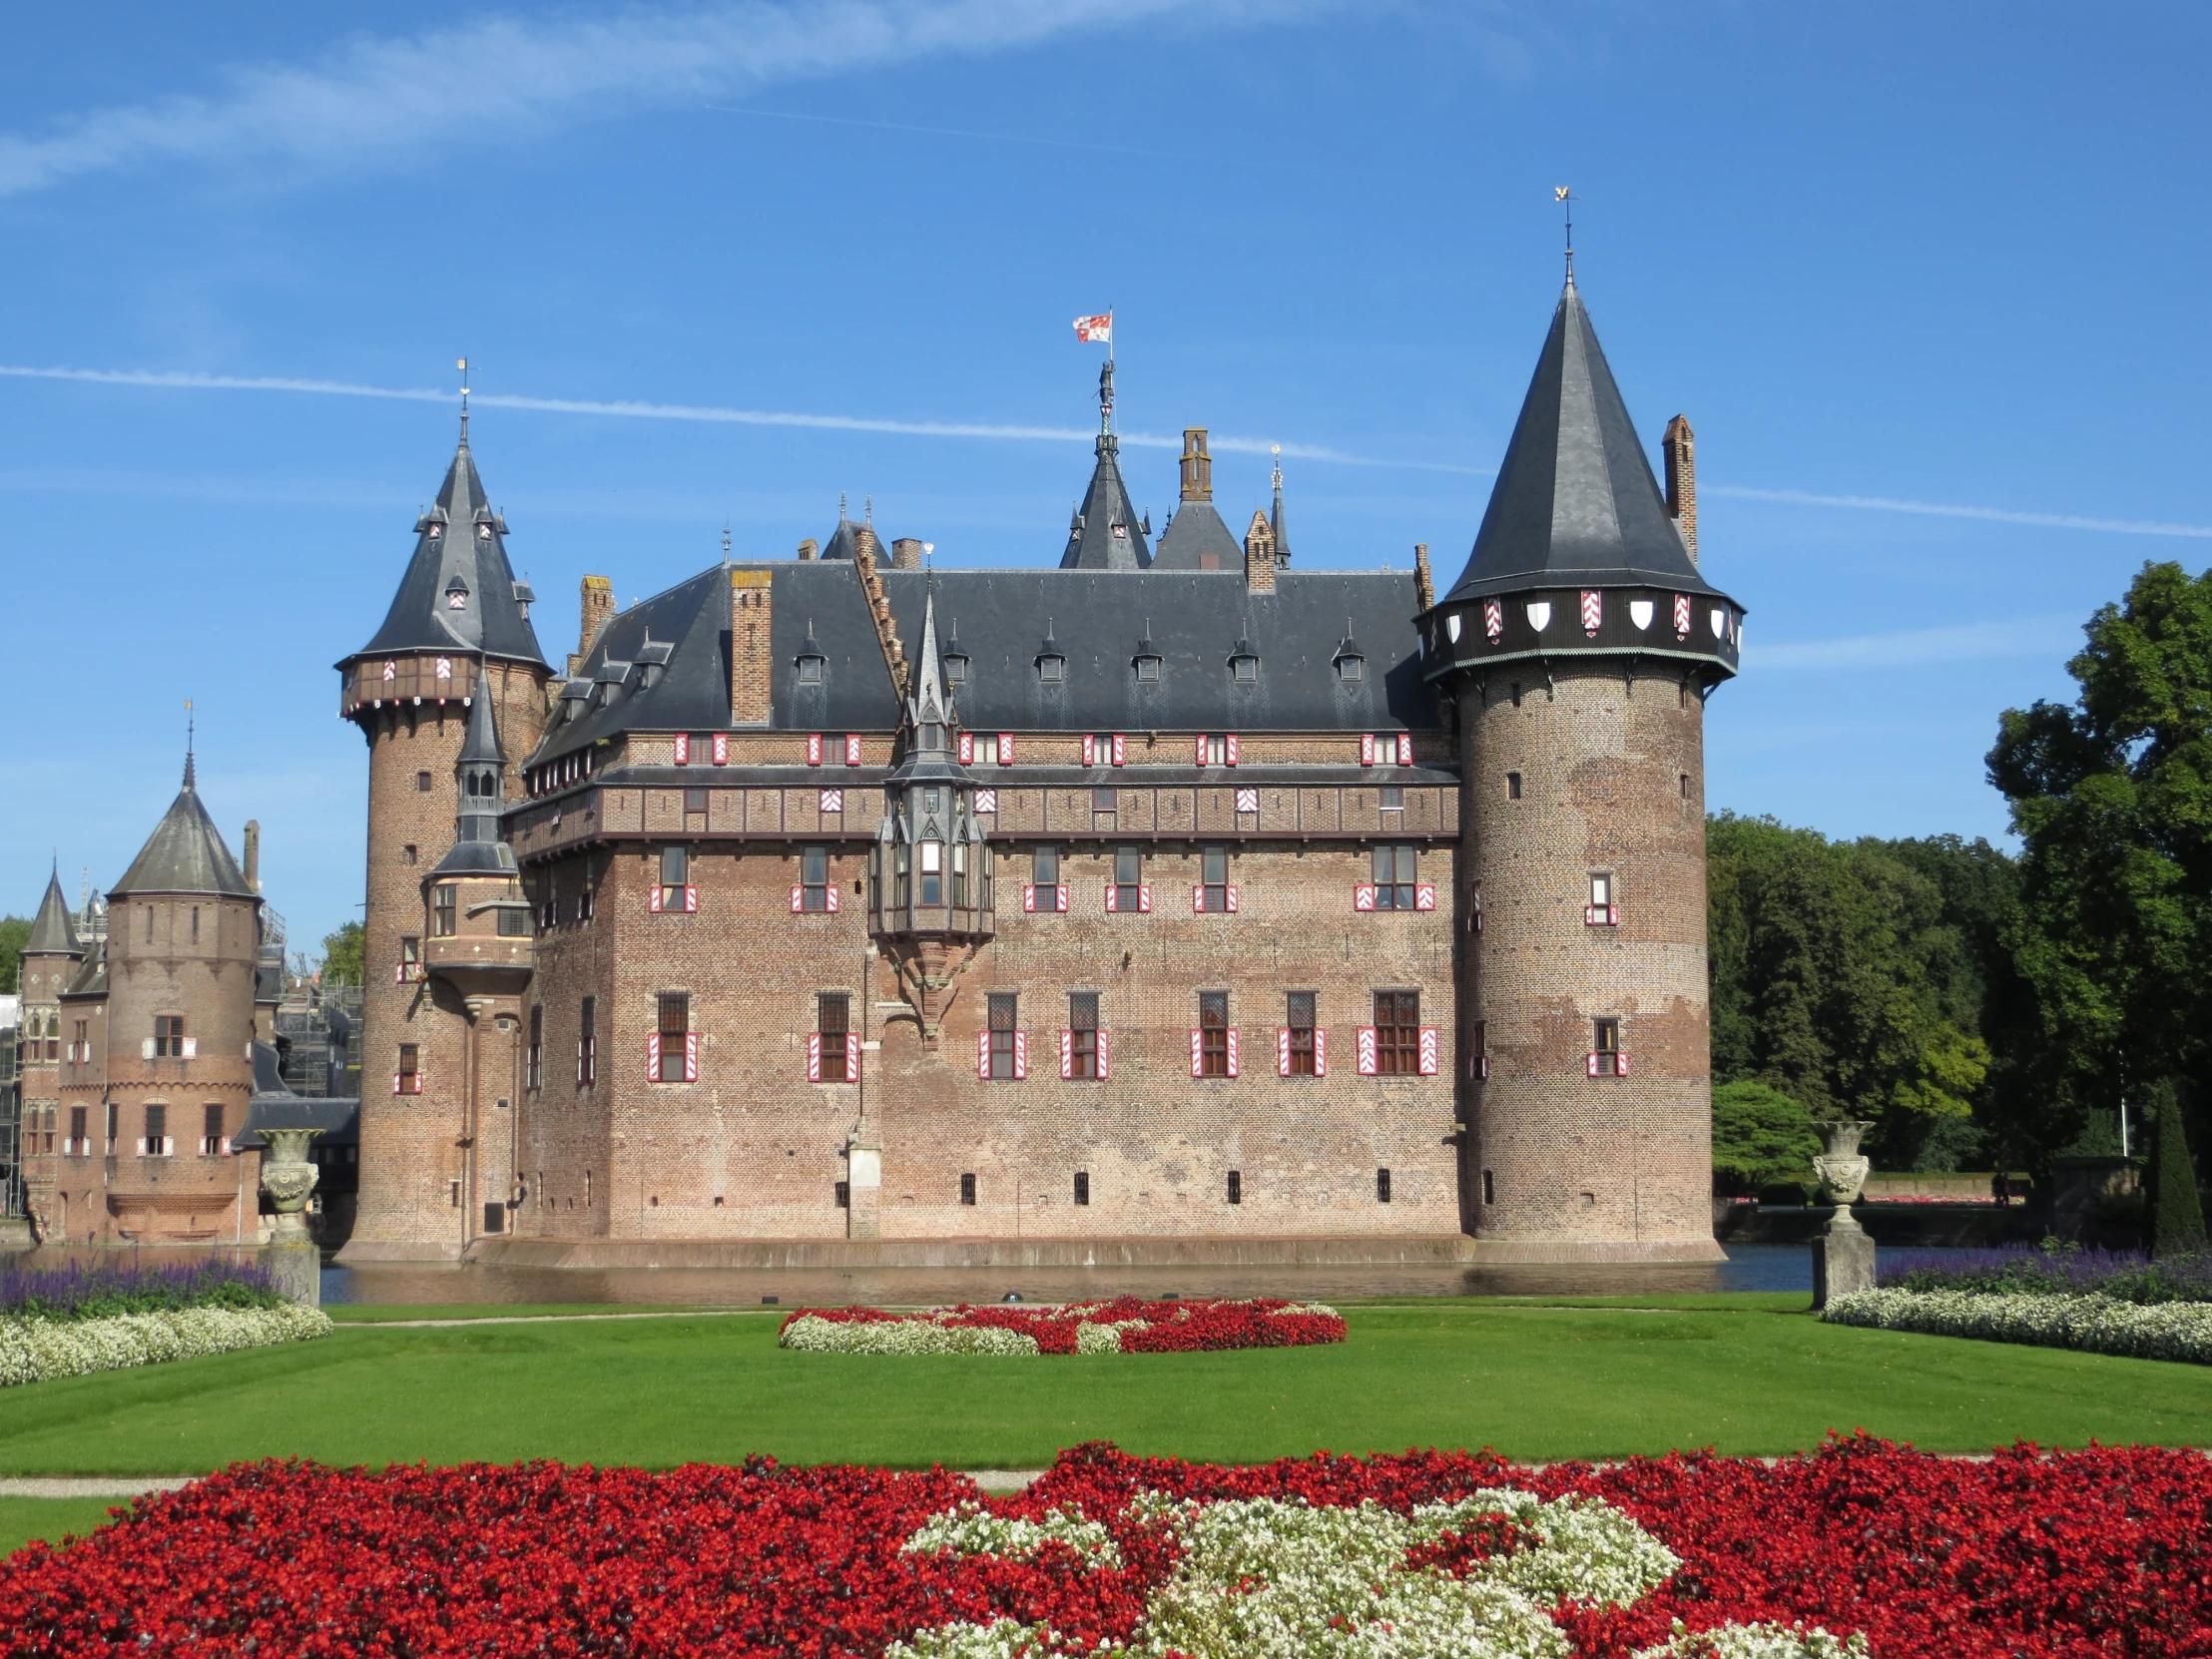 castle type building with multiple turrets and red flowers